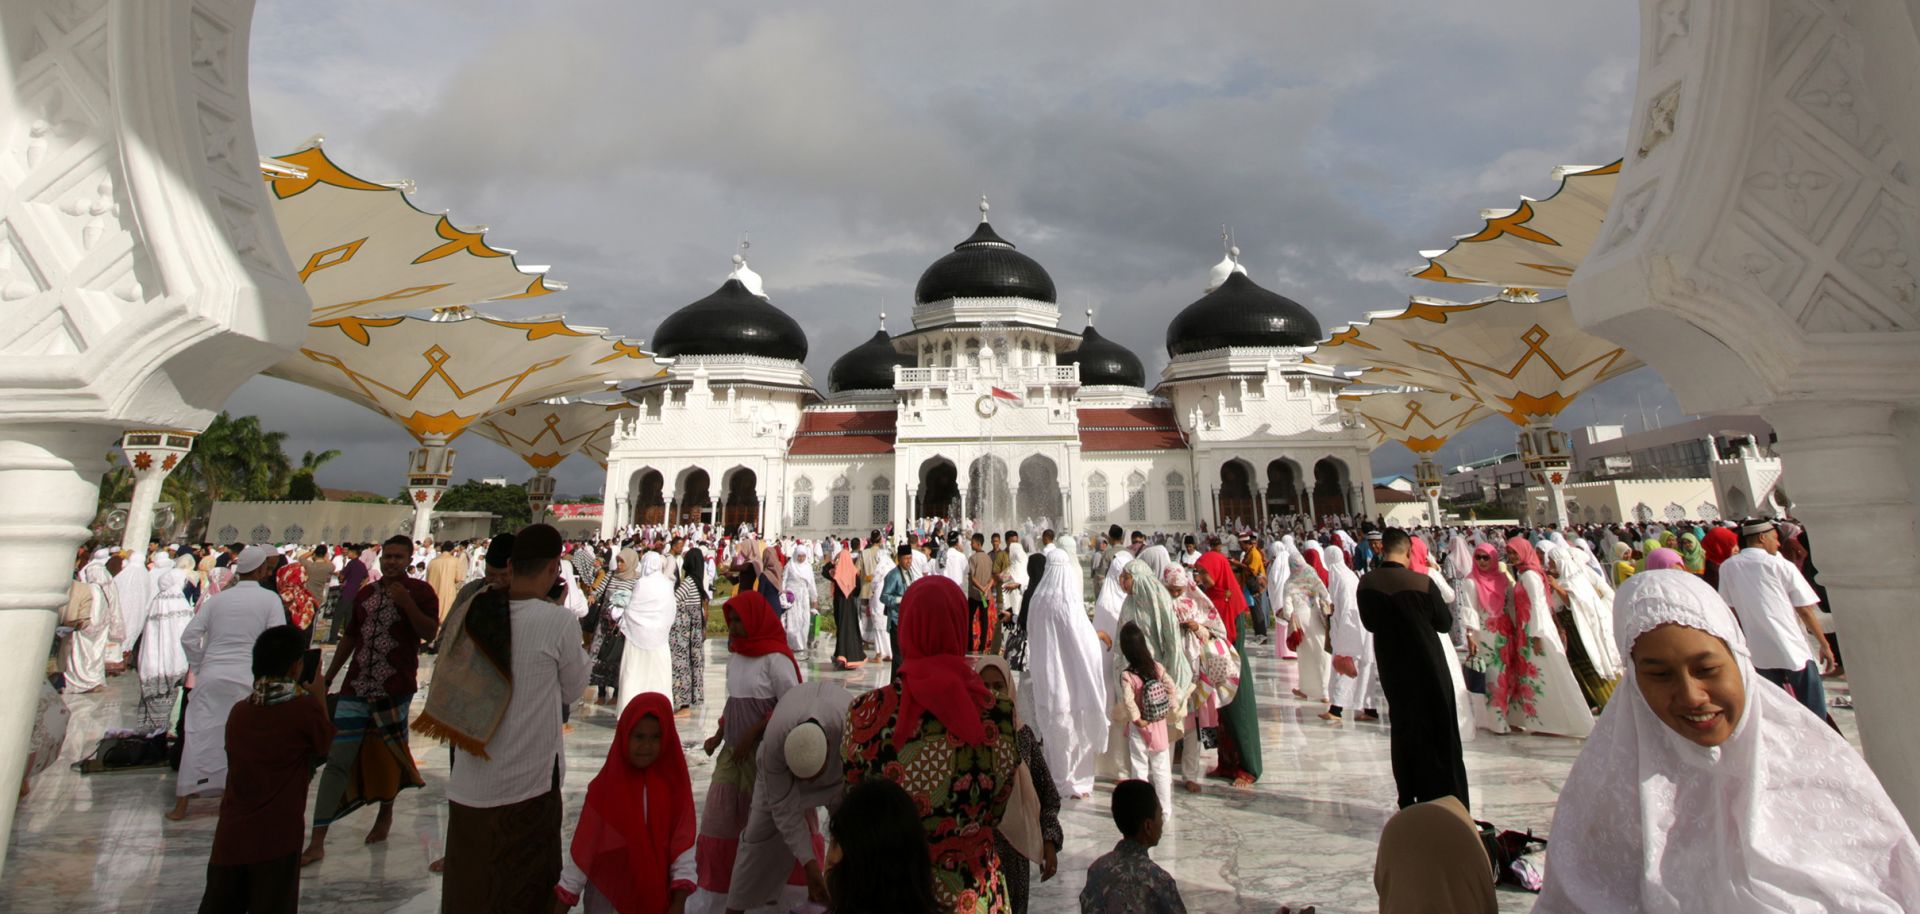 Indonesian Muslims offer Eid al-Fitr prayers at a mosque in Banda Aceh. Over the next two years, President Joko "Jokowi" Widodo will need political acumen to counter the opposition's appeal to Islamist sentiment to keep his ruling coalition together.